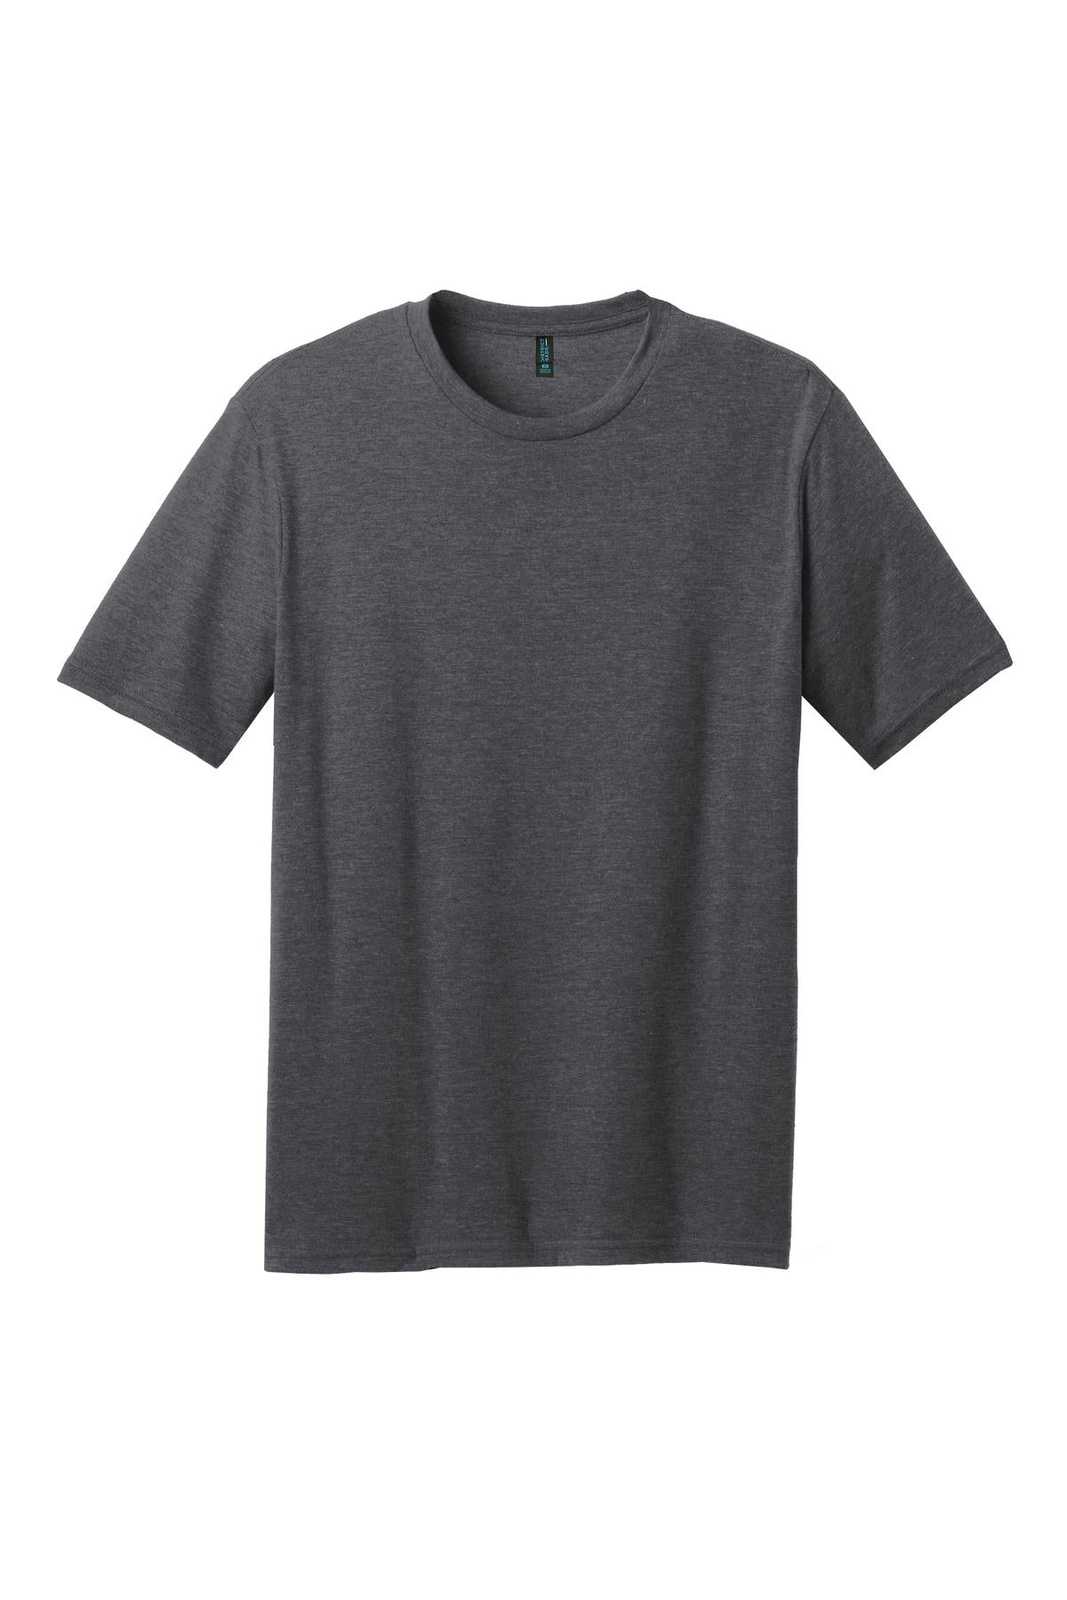 District DM108 Perfect Blend Tee - Heathered Charcoal - HIT a Double - 5